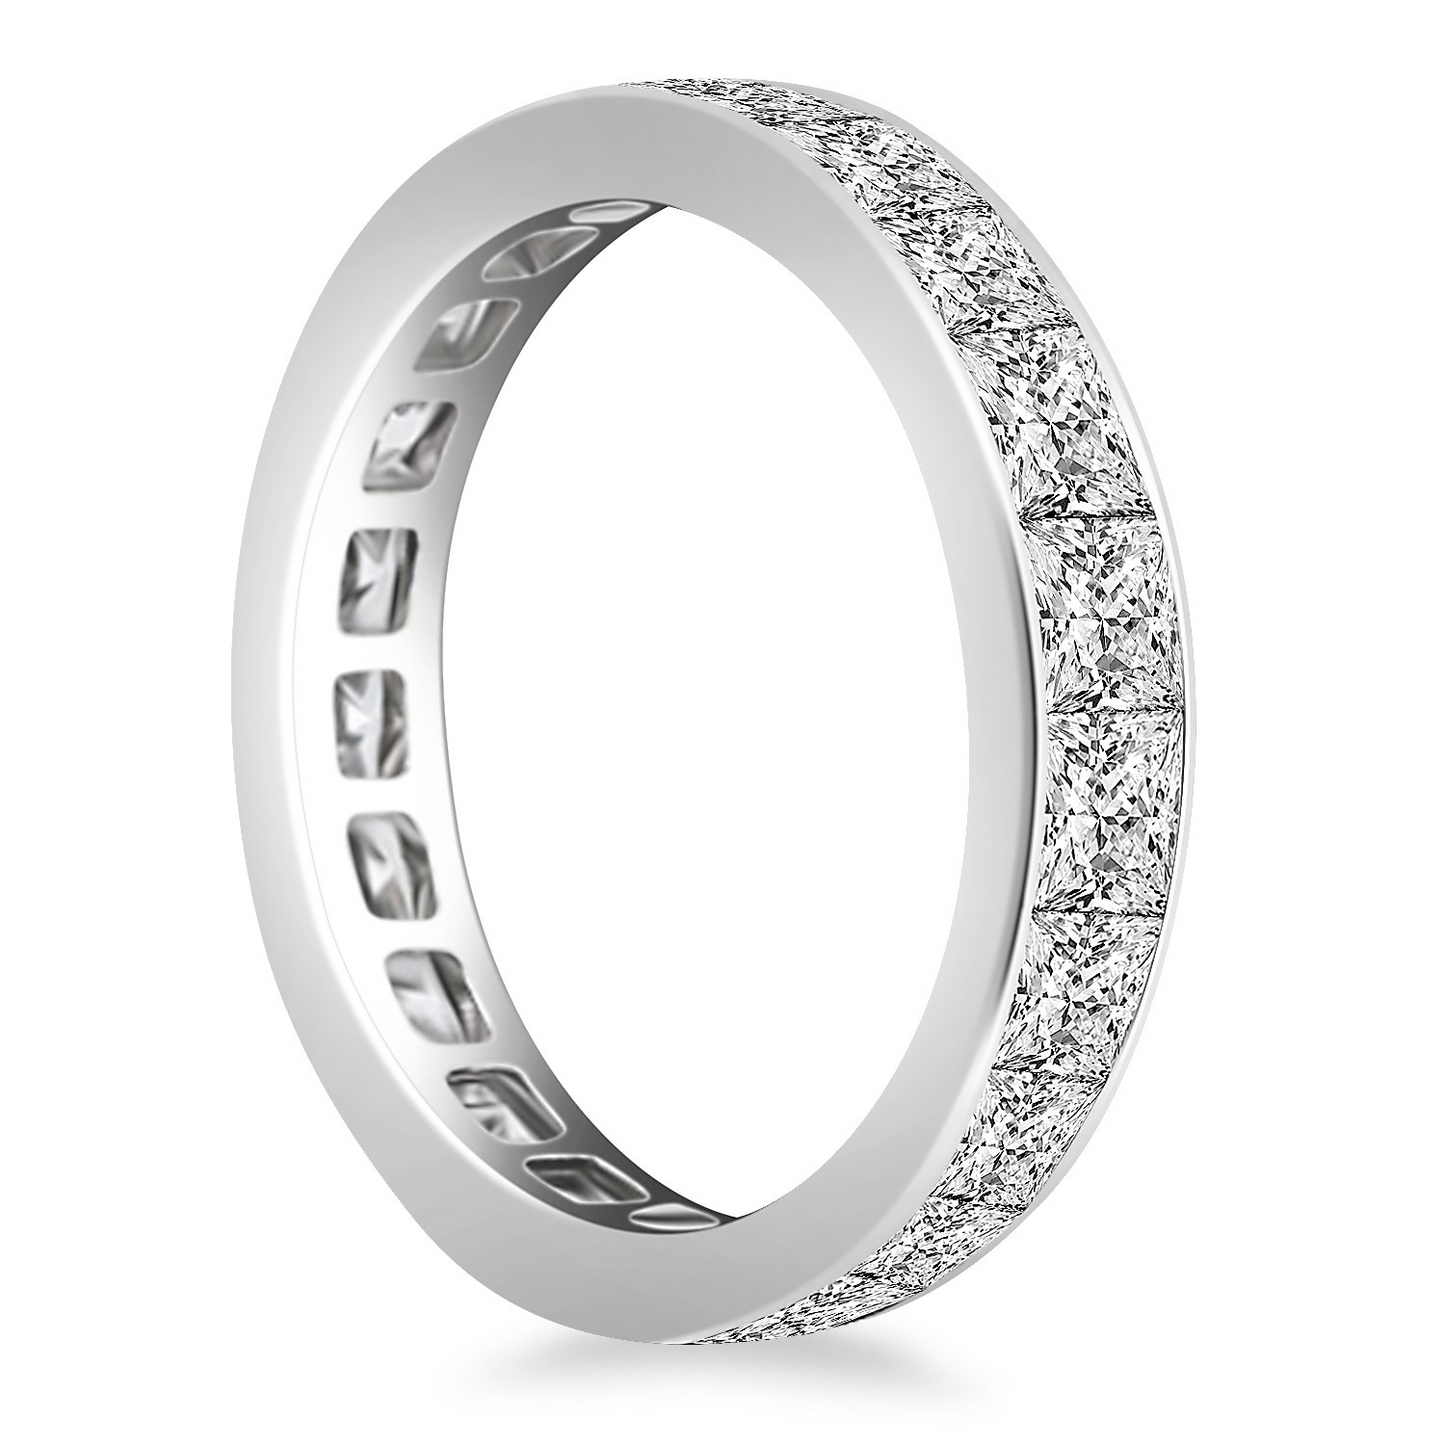 14k White Gold Eternity Ring with Channel Set Princess Cut Diamonds